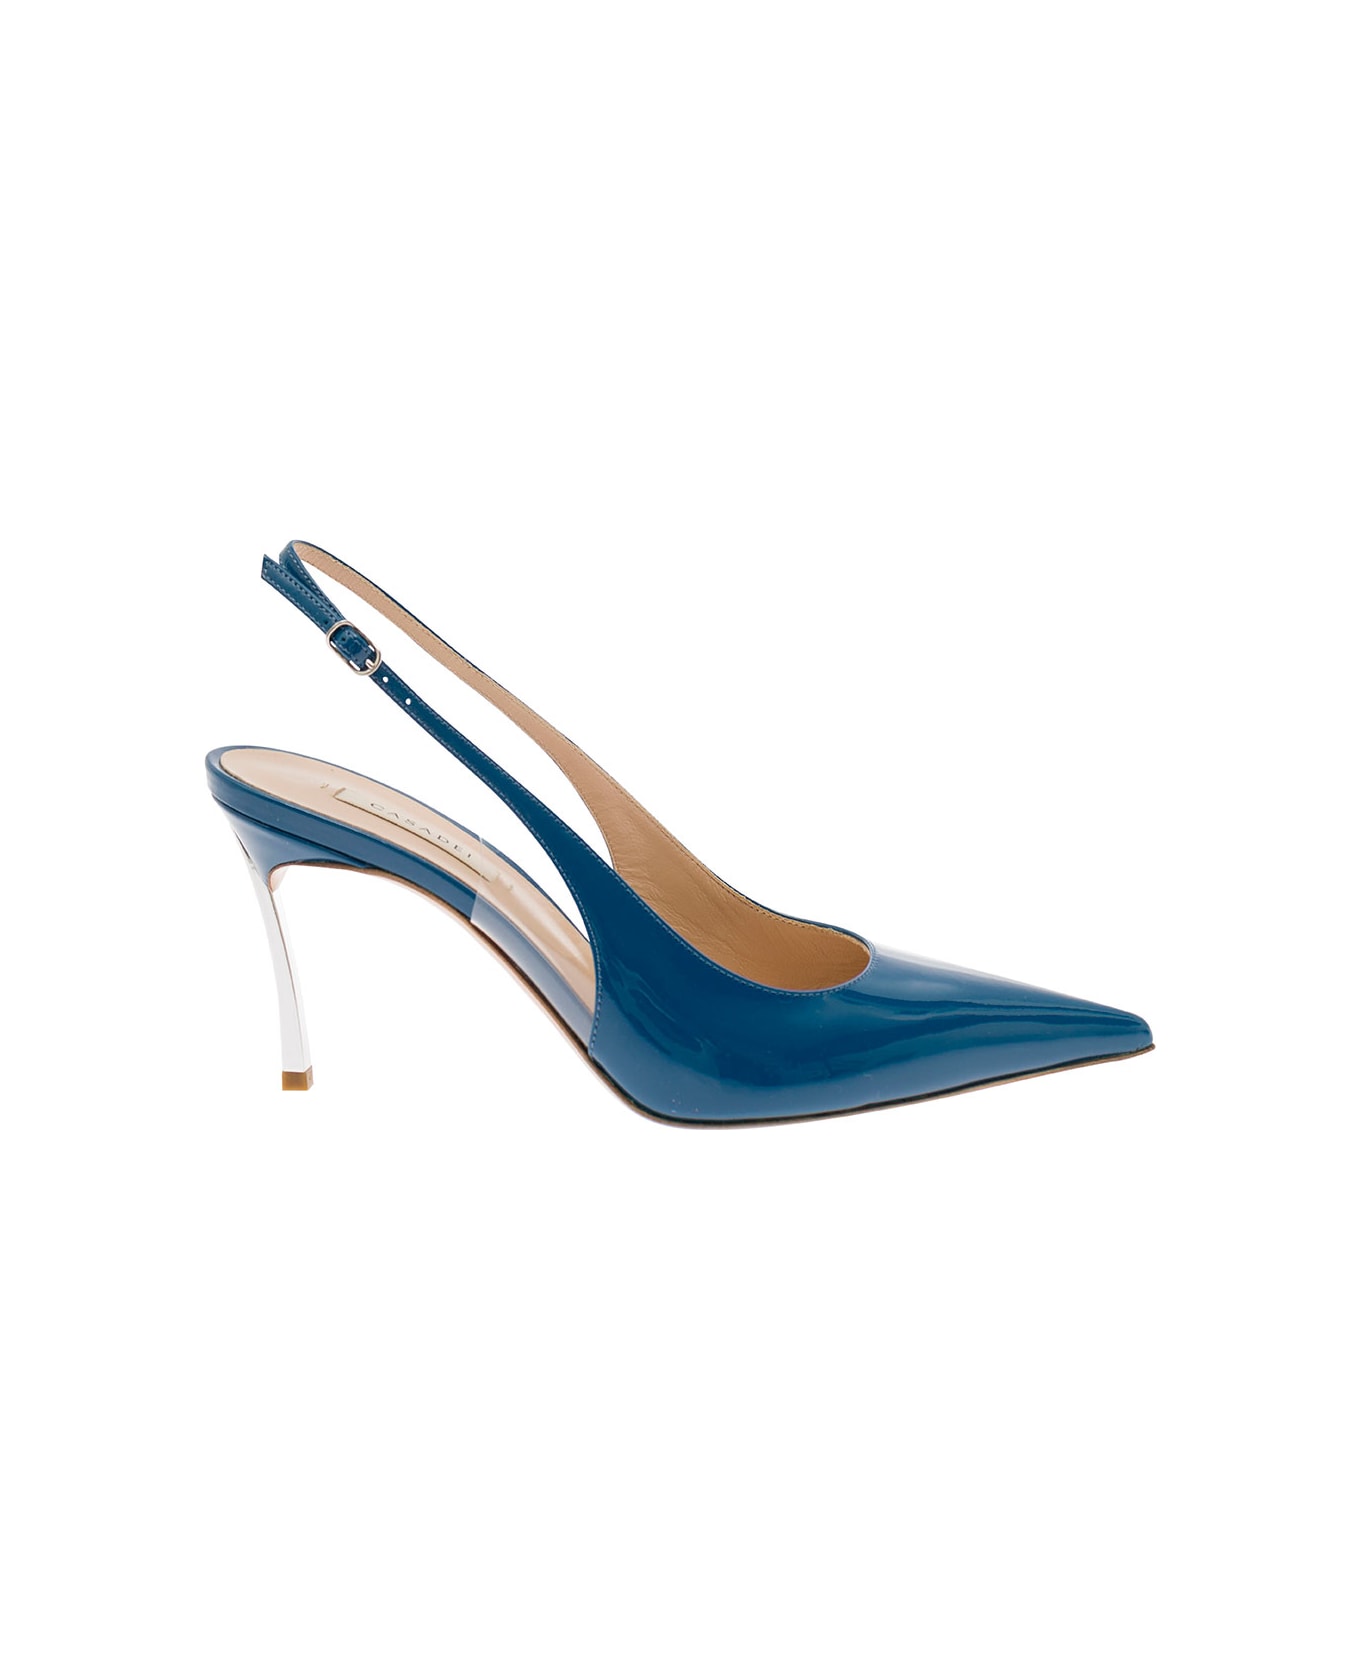 Casadei Light Blue Slingback Pumps With Blade Heel In Patent Leather Woman - Blu